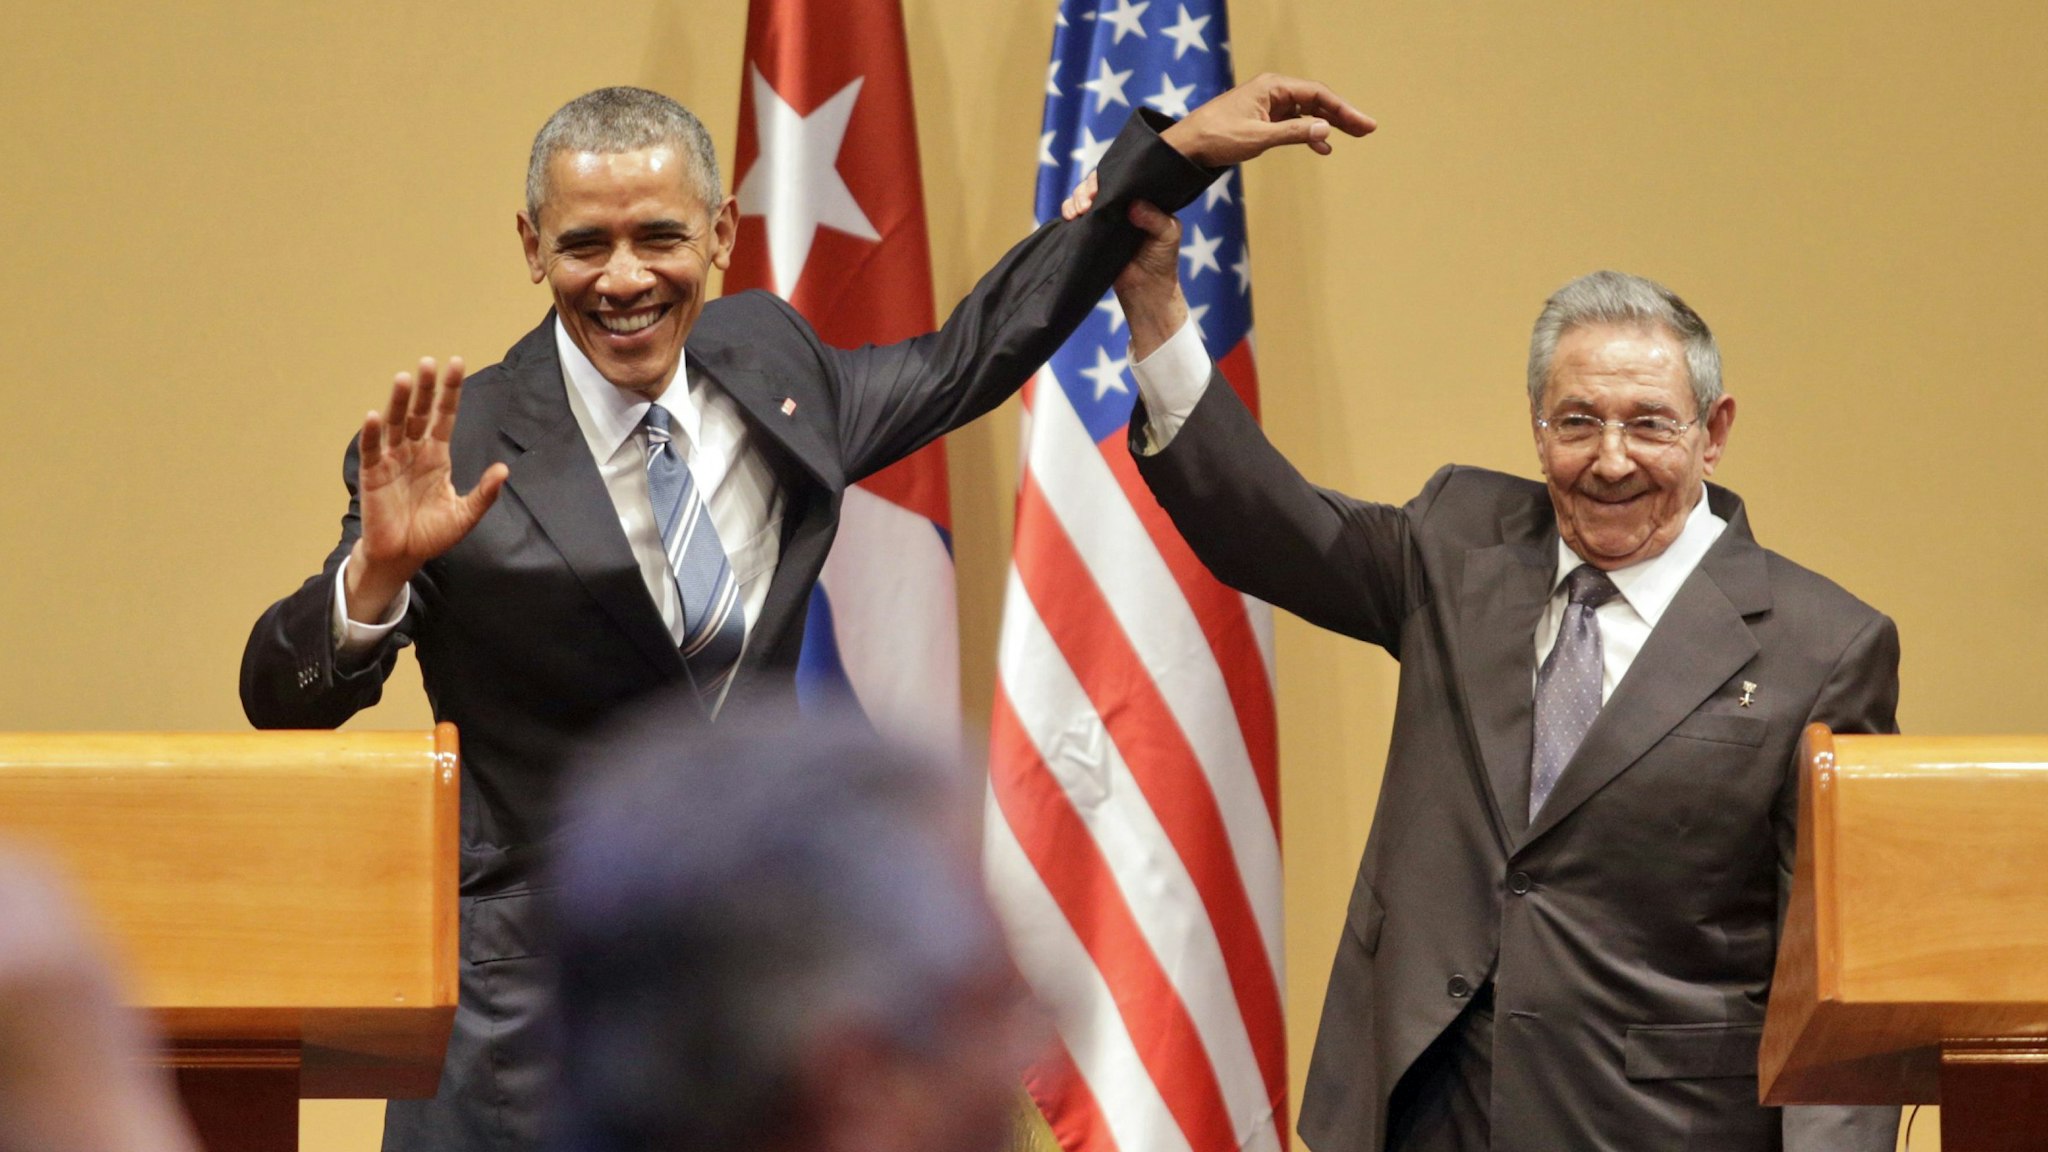 HAVANA, CUBA - MARCH 21: Cuba President Raul Castro (R) lifts the arm of U.S. President Barack Obama at the end of a joint press conference at the Cuban State Council, on March 21, 2016 in Havana, Cuba. Mr. Obama, who is on a 48 hour trip to Cuba, is the first sitting U.S. President to visit Cuba in almost 90 years.